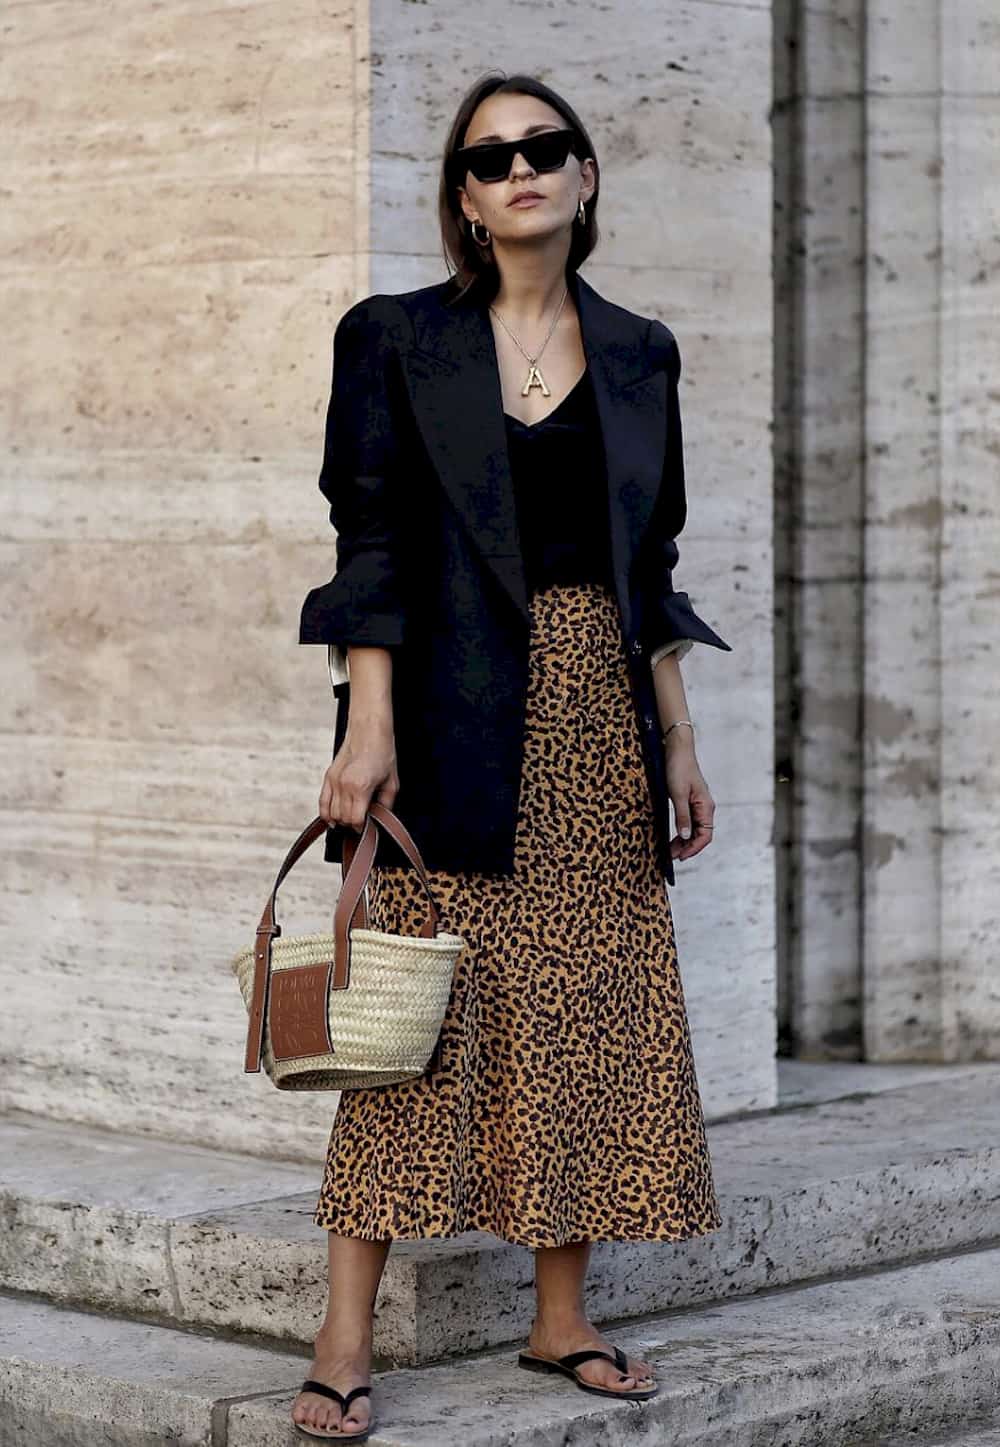 image of a woman in a black blazer, leopard skirt, and black top, with a basket bag purse